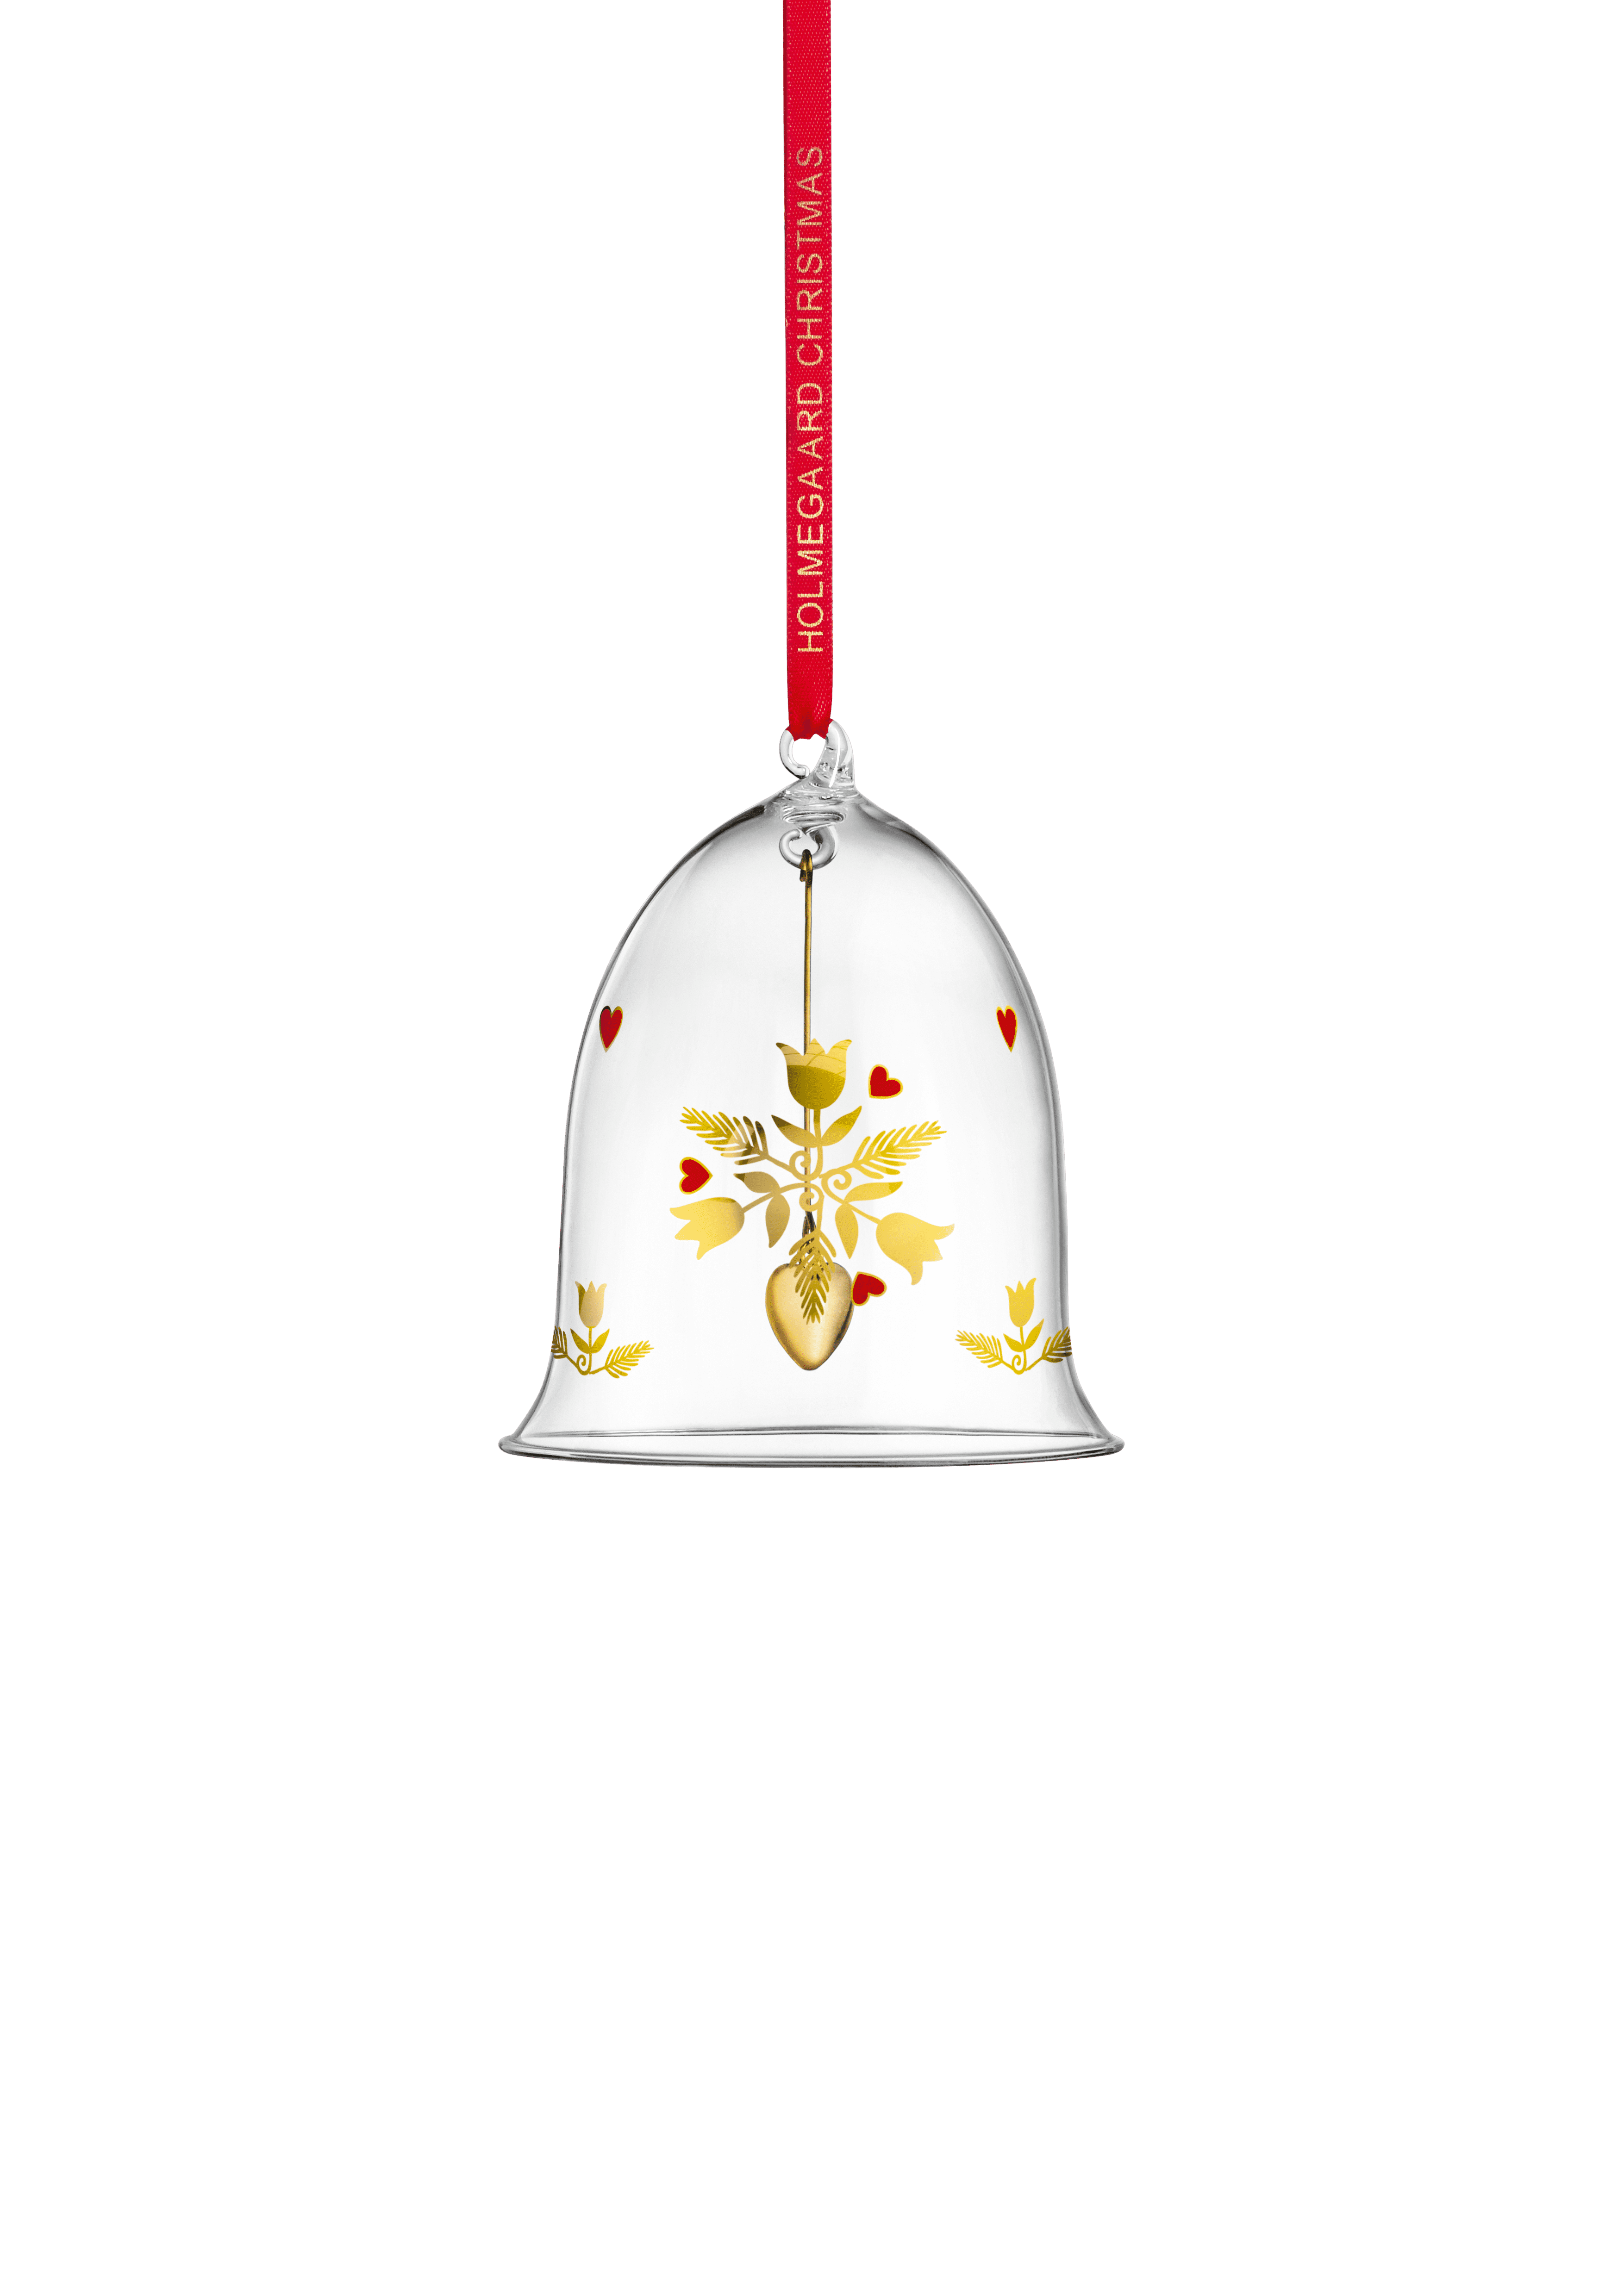 Annual Christmas Bell large